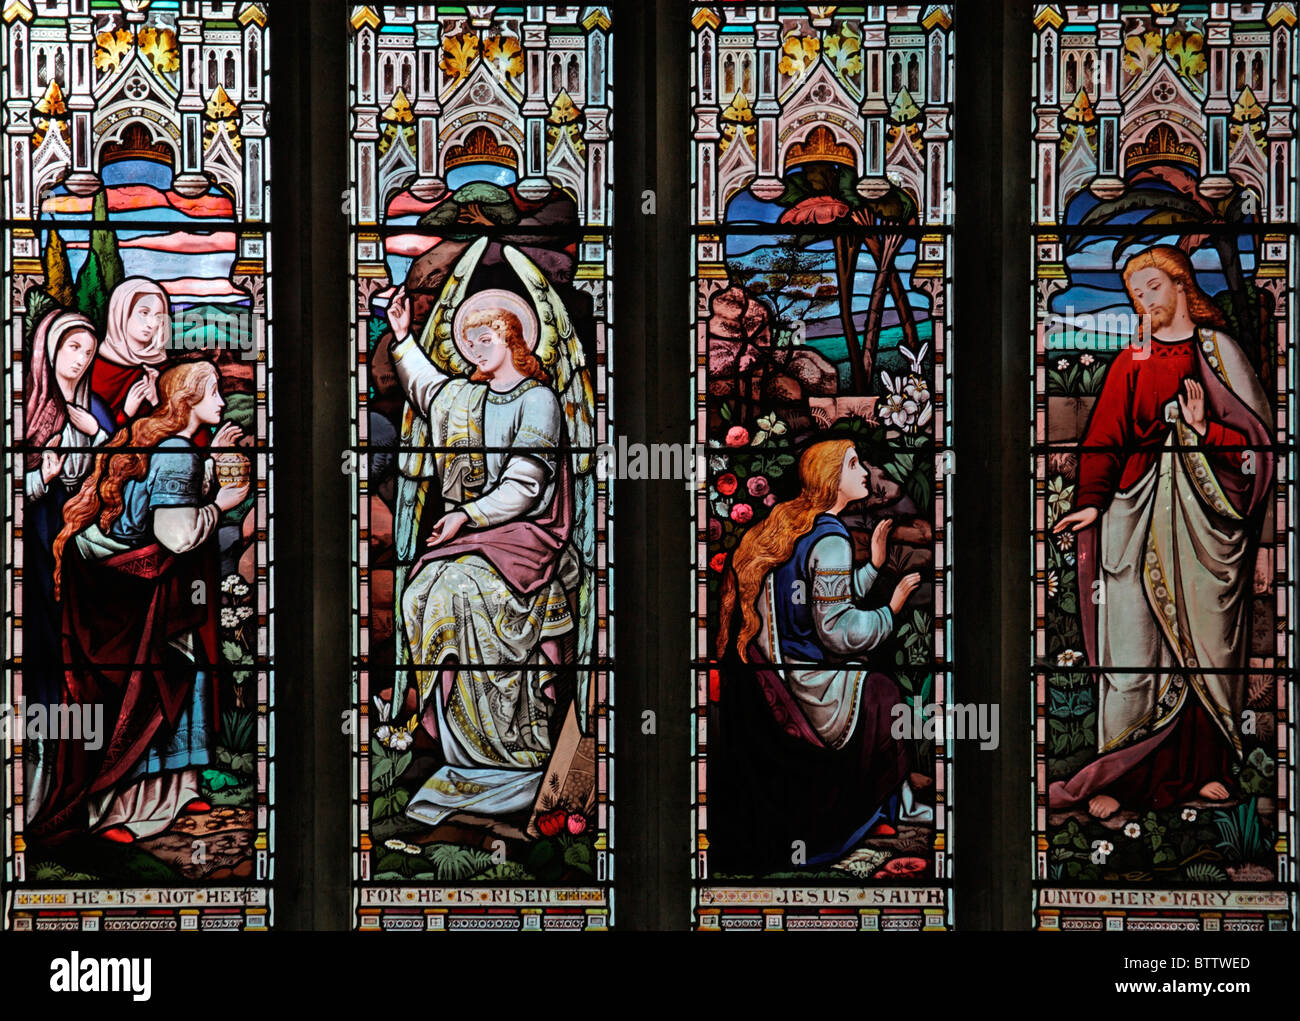 A stained glass window depicting The Resurrection Stories, Parish Church of St Aldhelm, Bishopstrow, Wiltshire, England Stock Photo